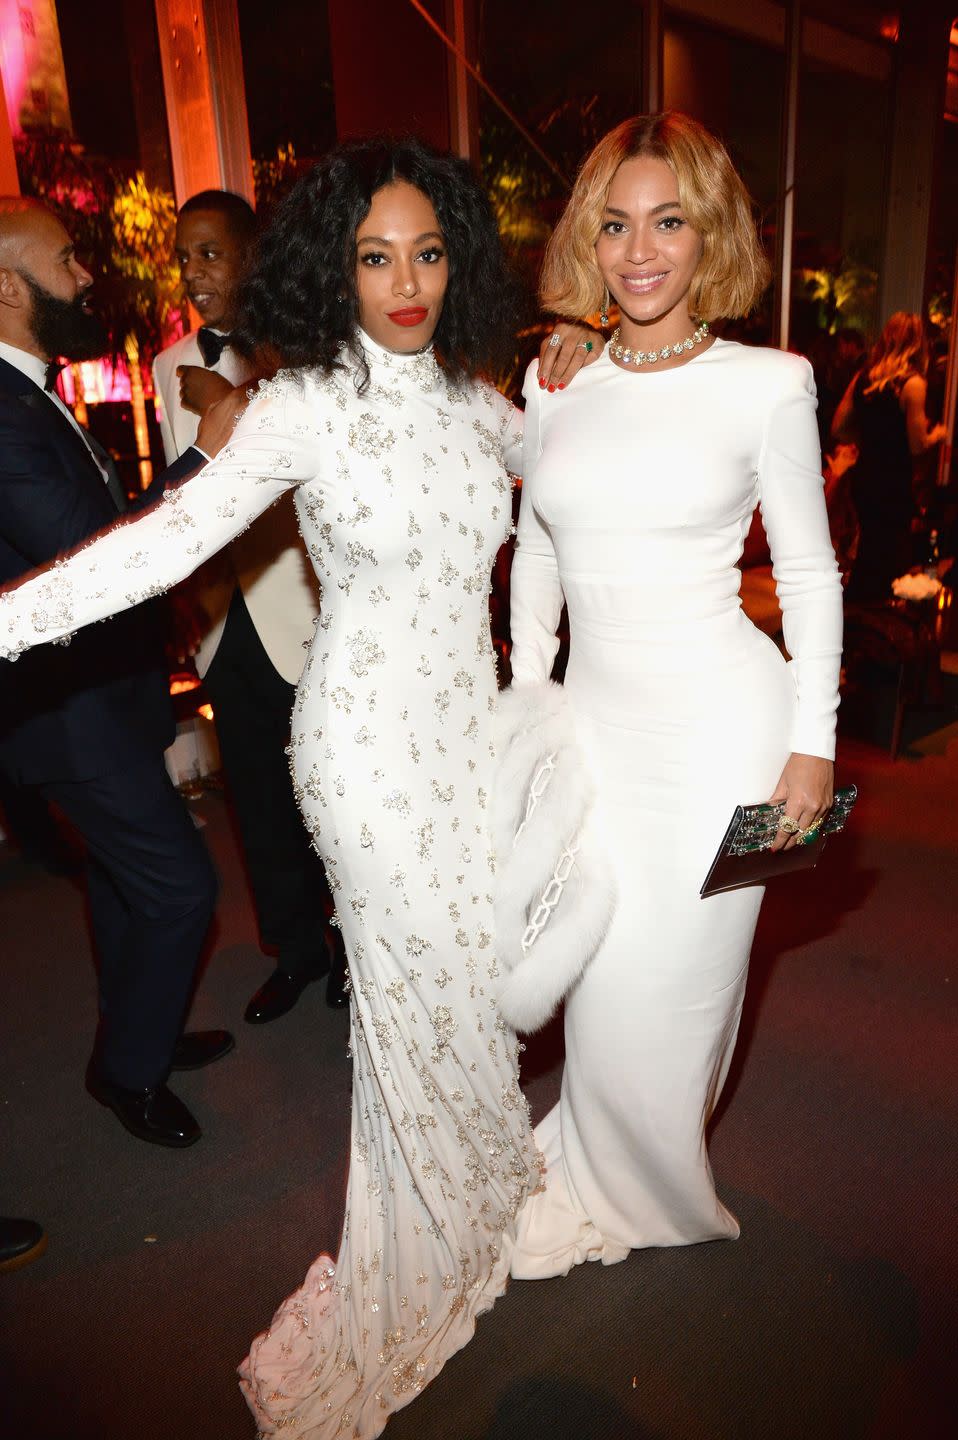 <p>Solange Knowles followed in her older sister, Beyoncé's, footsteps as a singer-songwriter, as well as snagging a few acting roles. Talent aside, their resemblance has turned this duo into one of Hollywood's favorite pairs.</p>